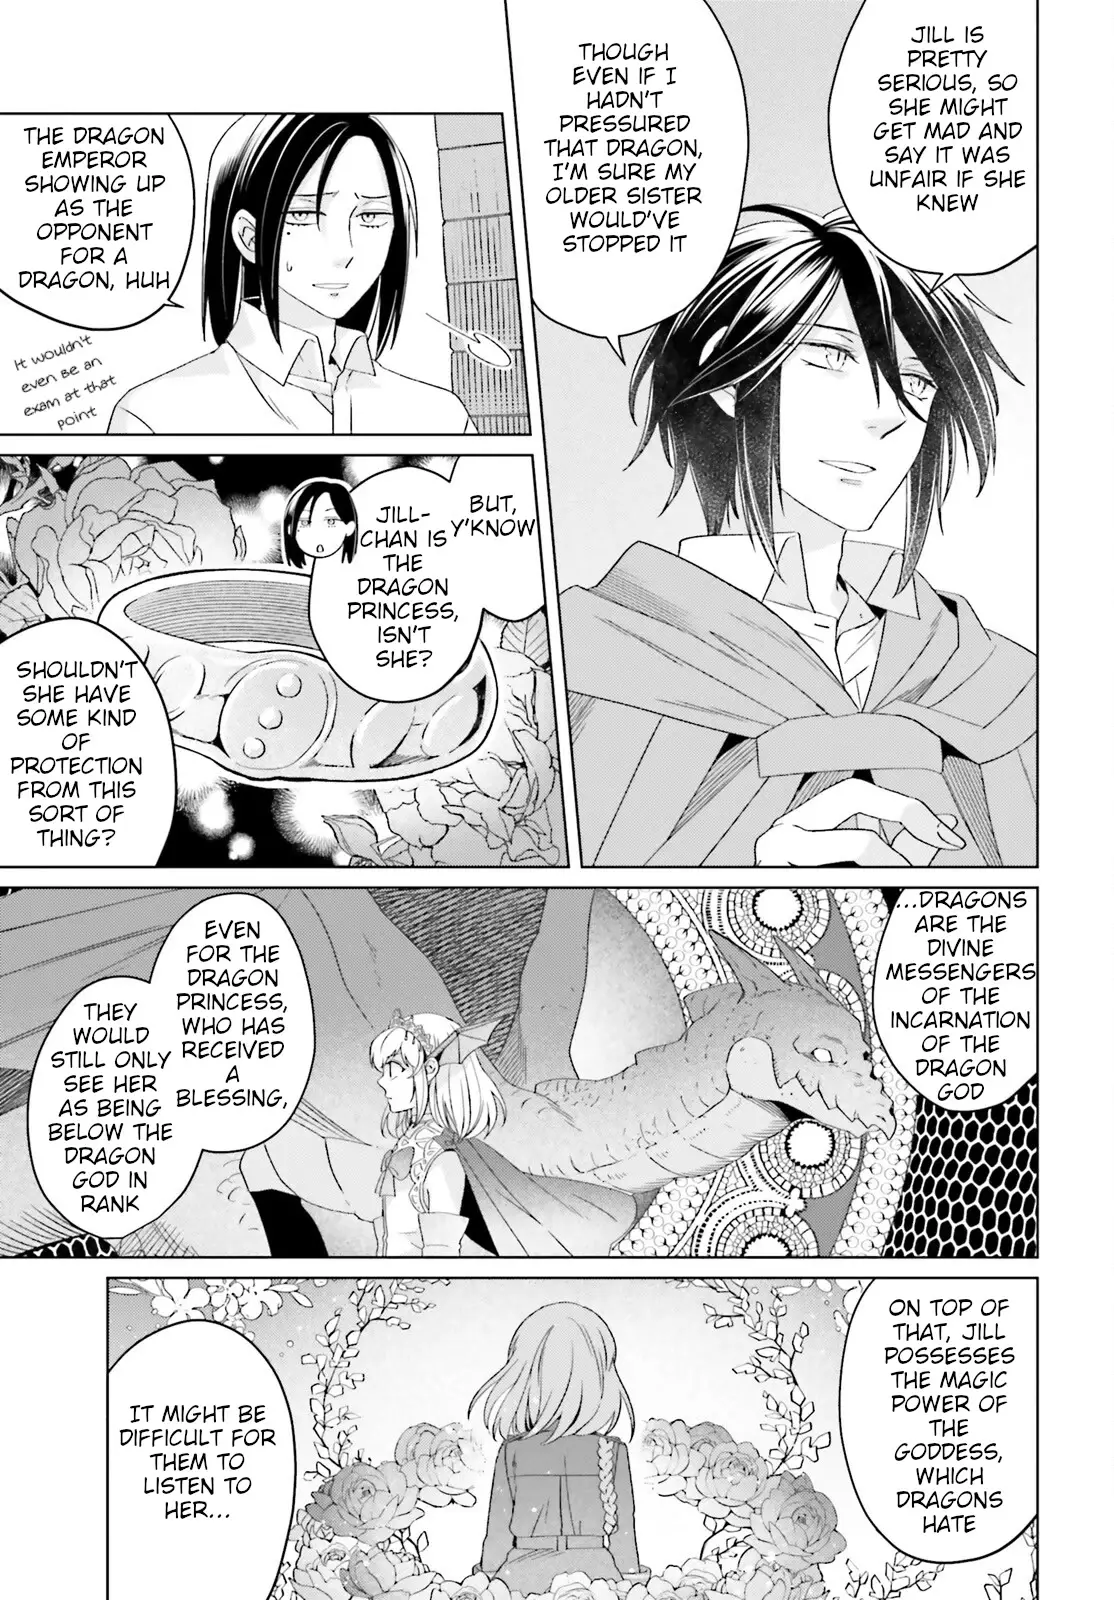 Win Over The Dragon Emperor This Time Around, Noble Girl! - 18 page 29-9e8be8bc